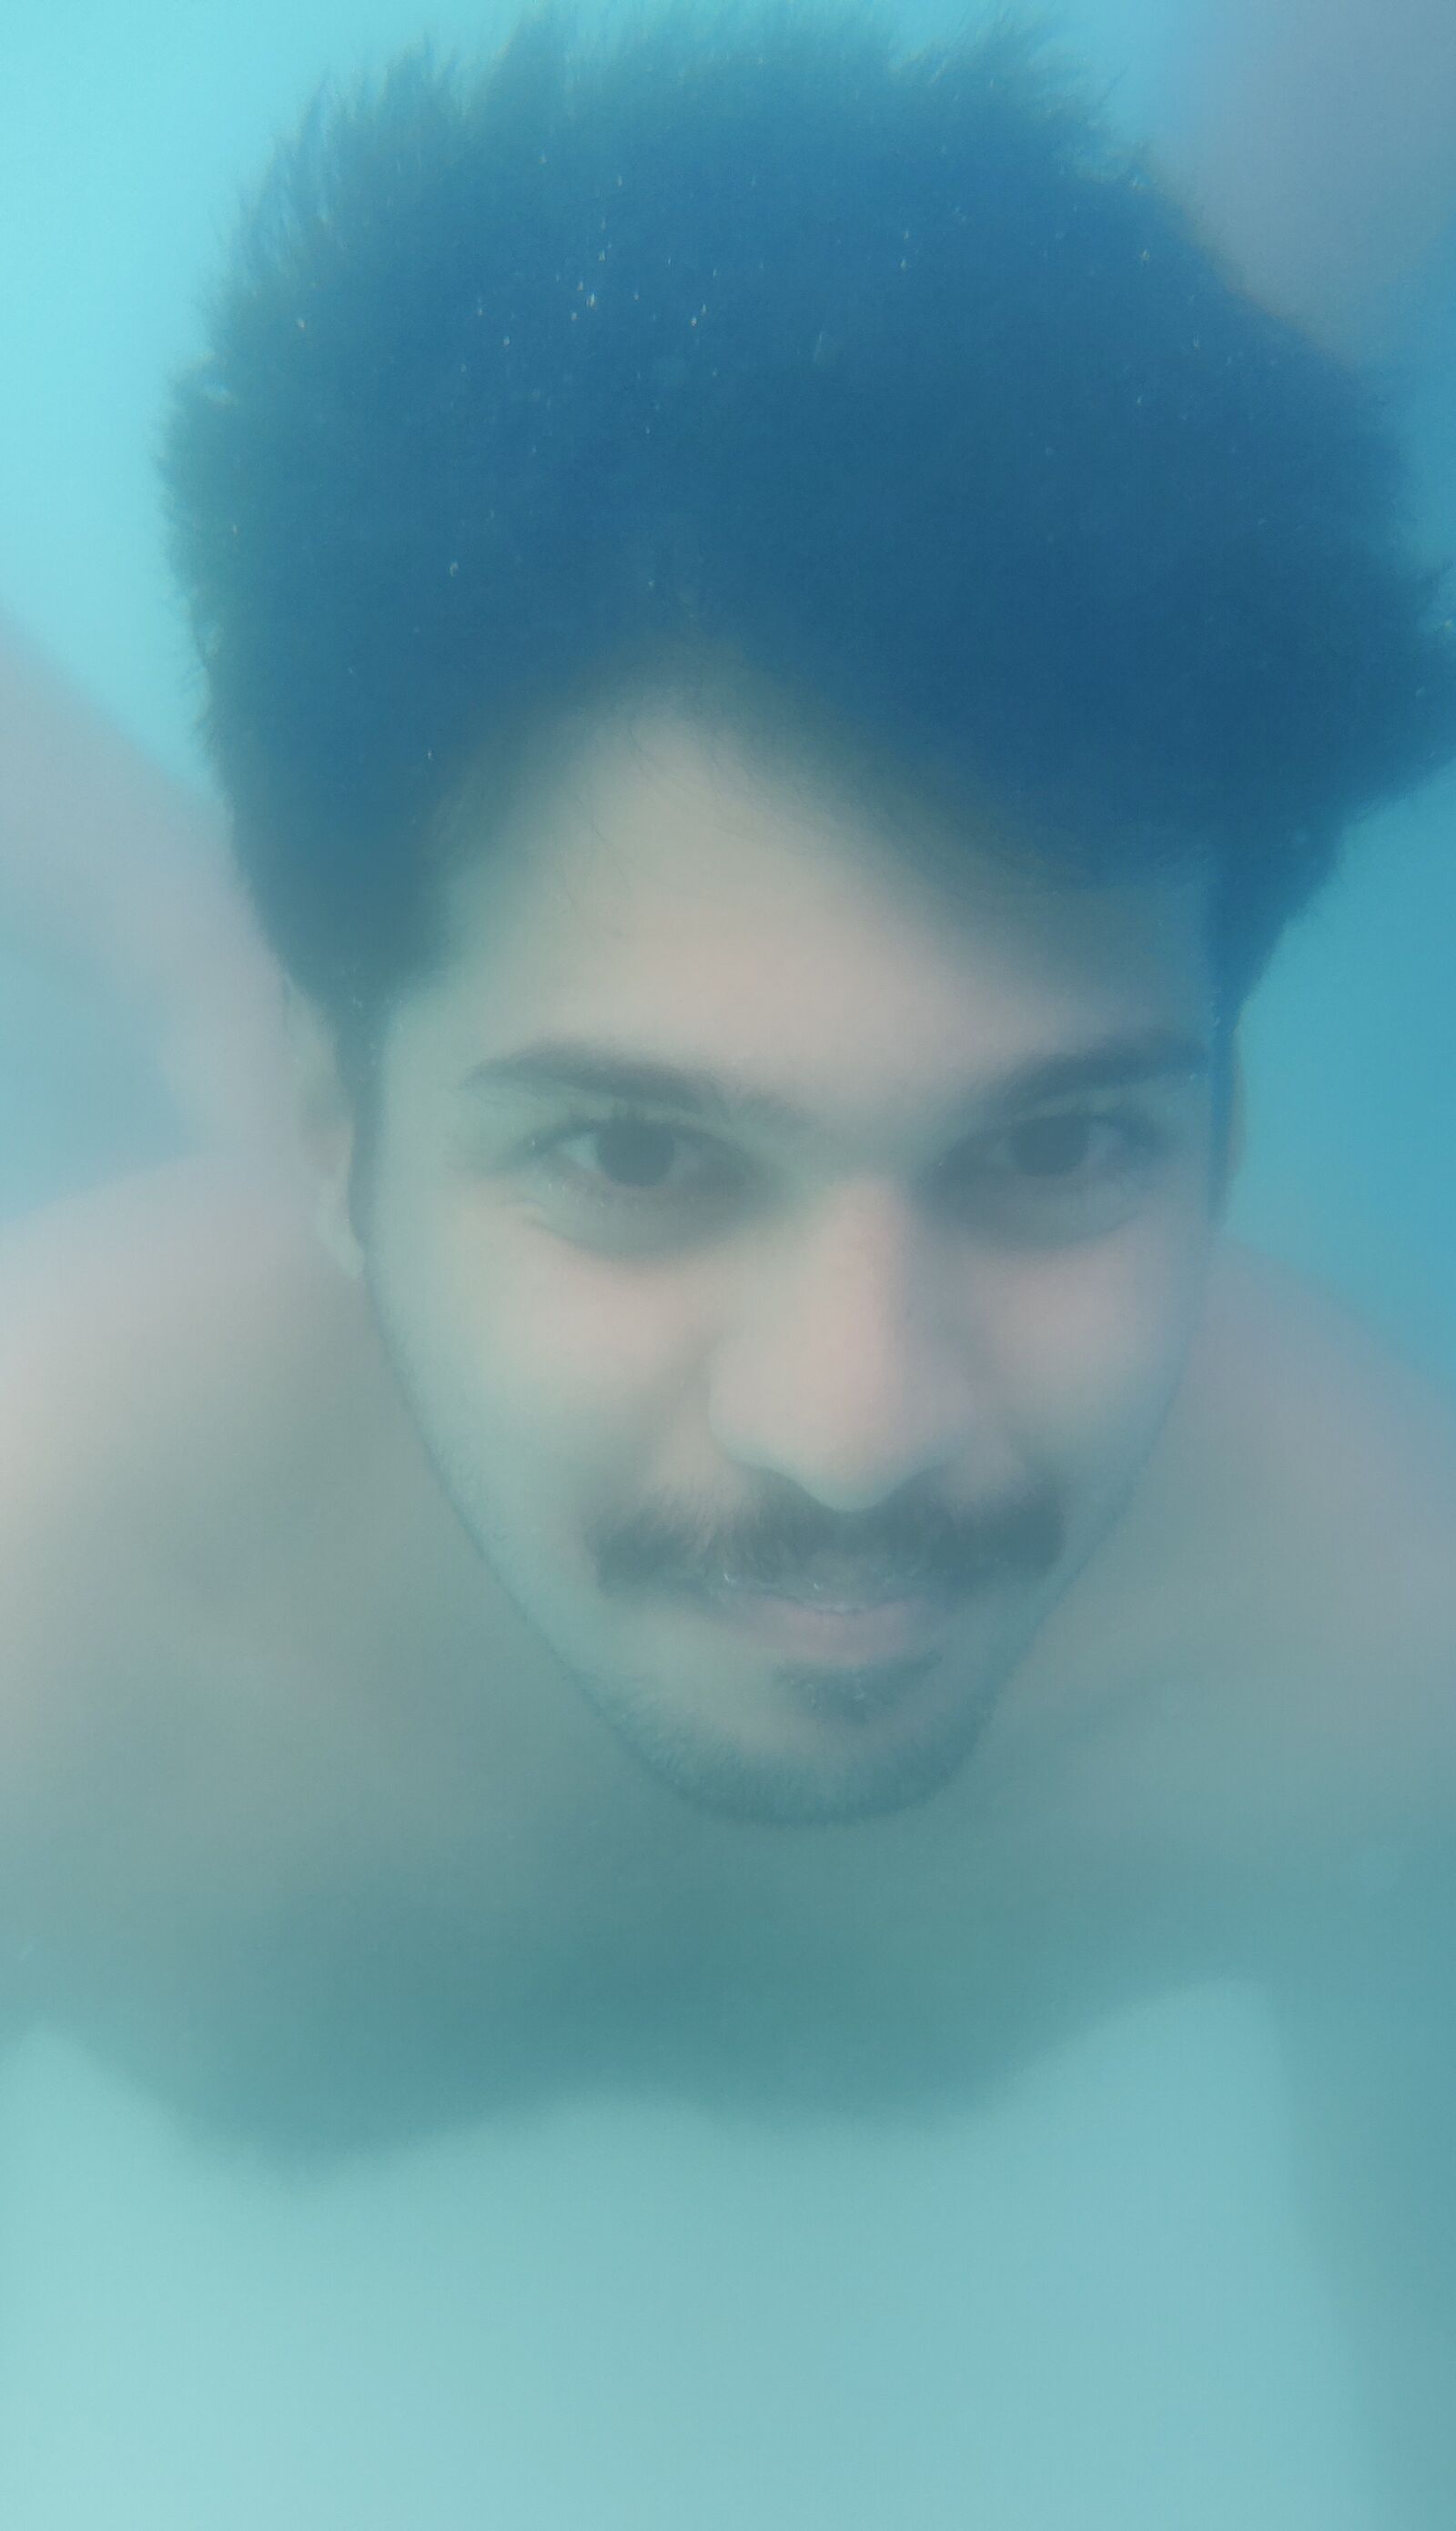 OnePlus A6010 sample photo. Man, swimming, underwater photography